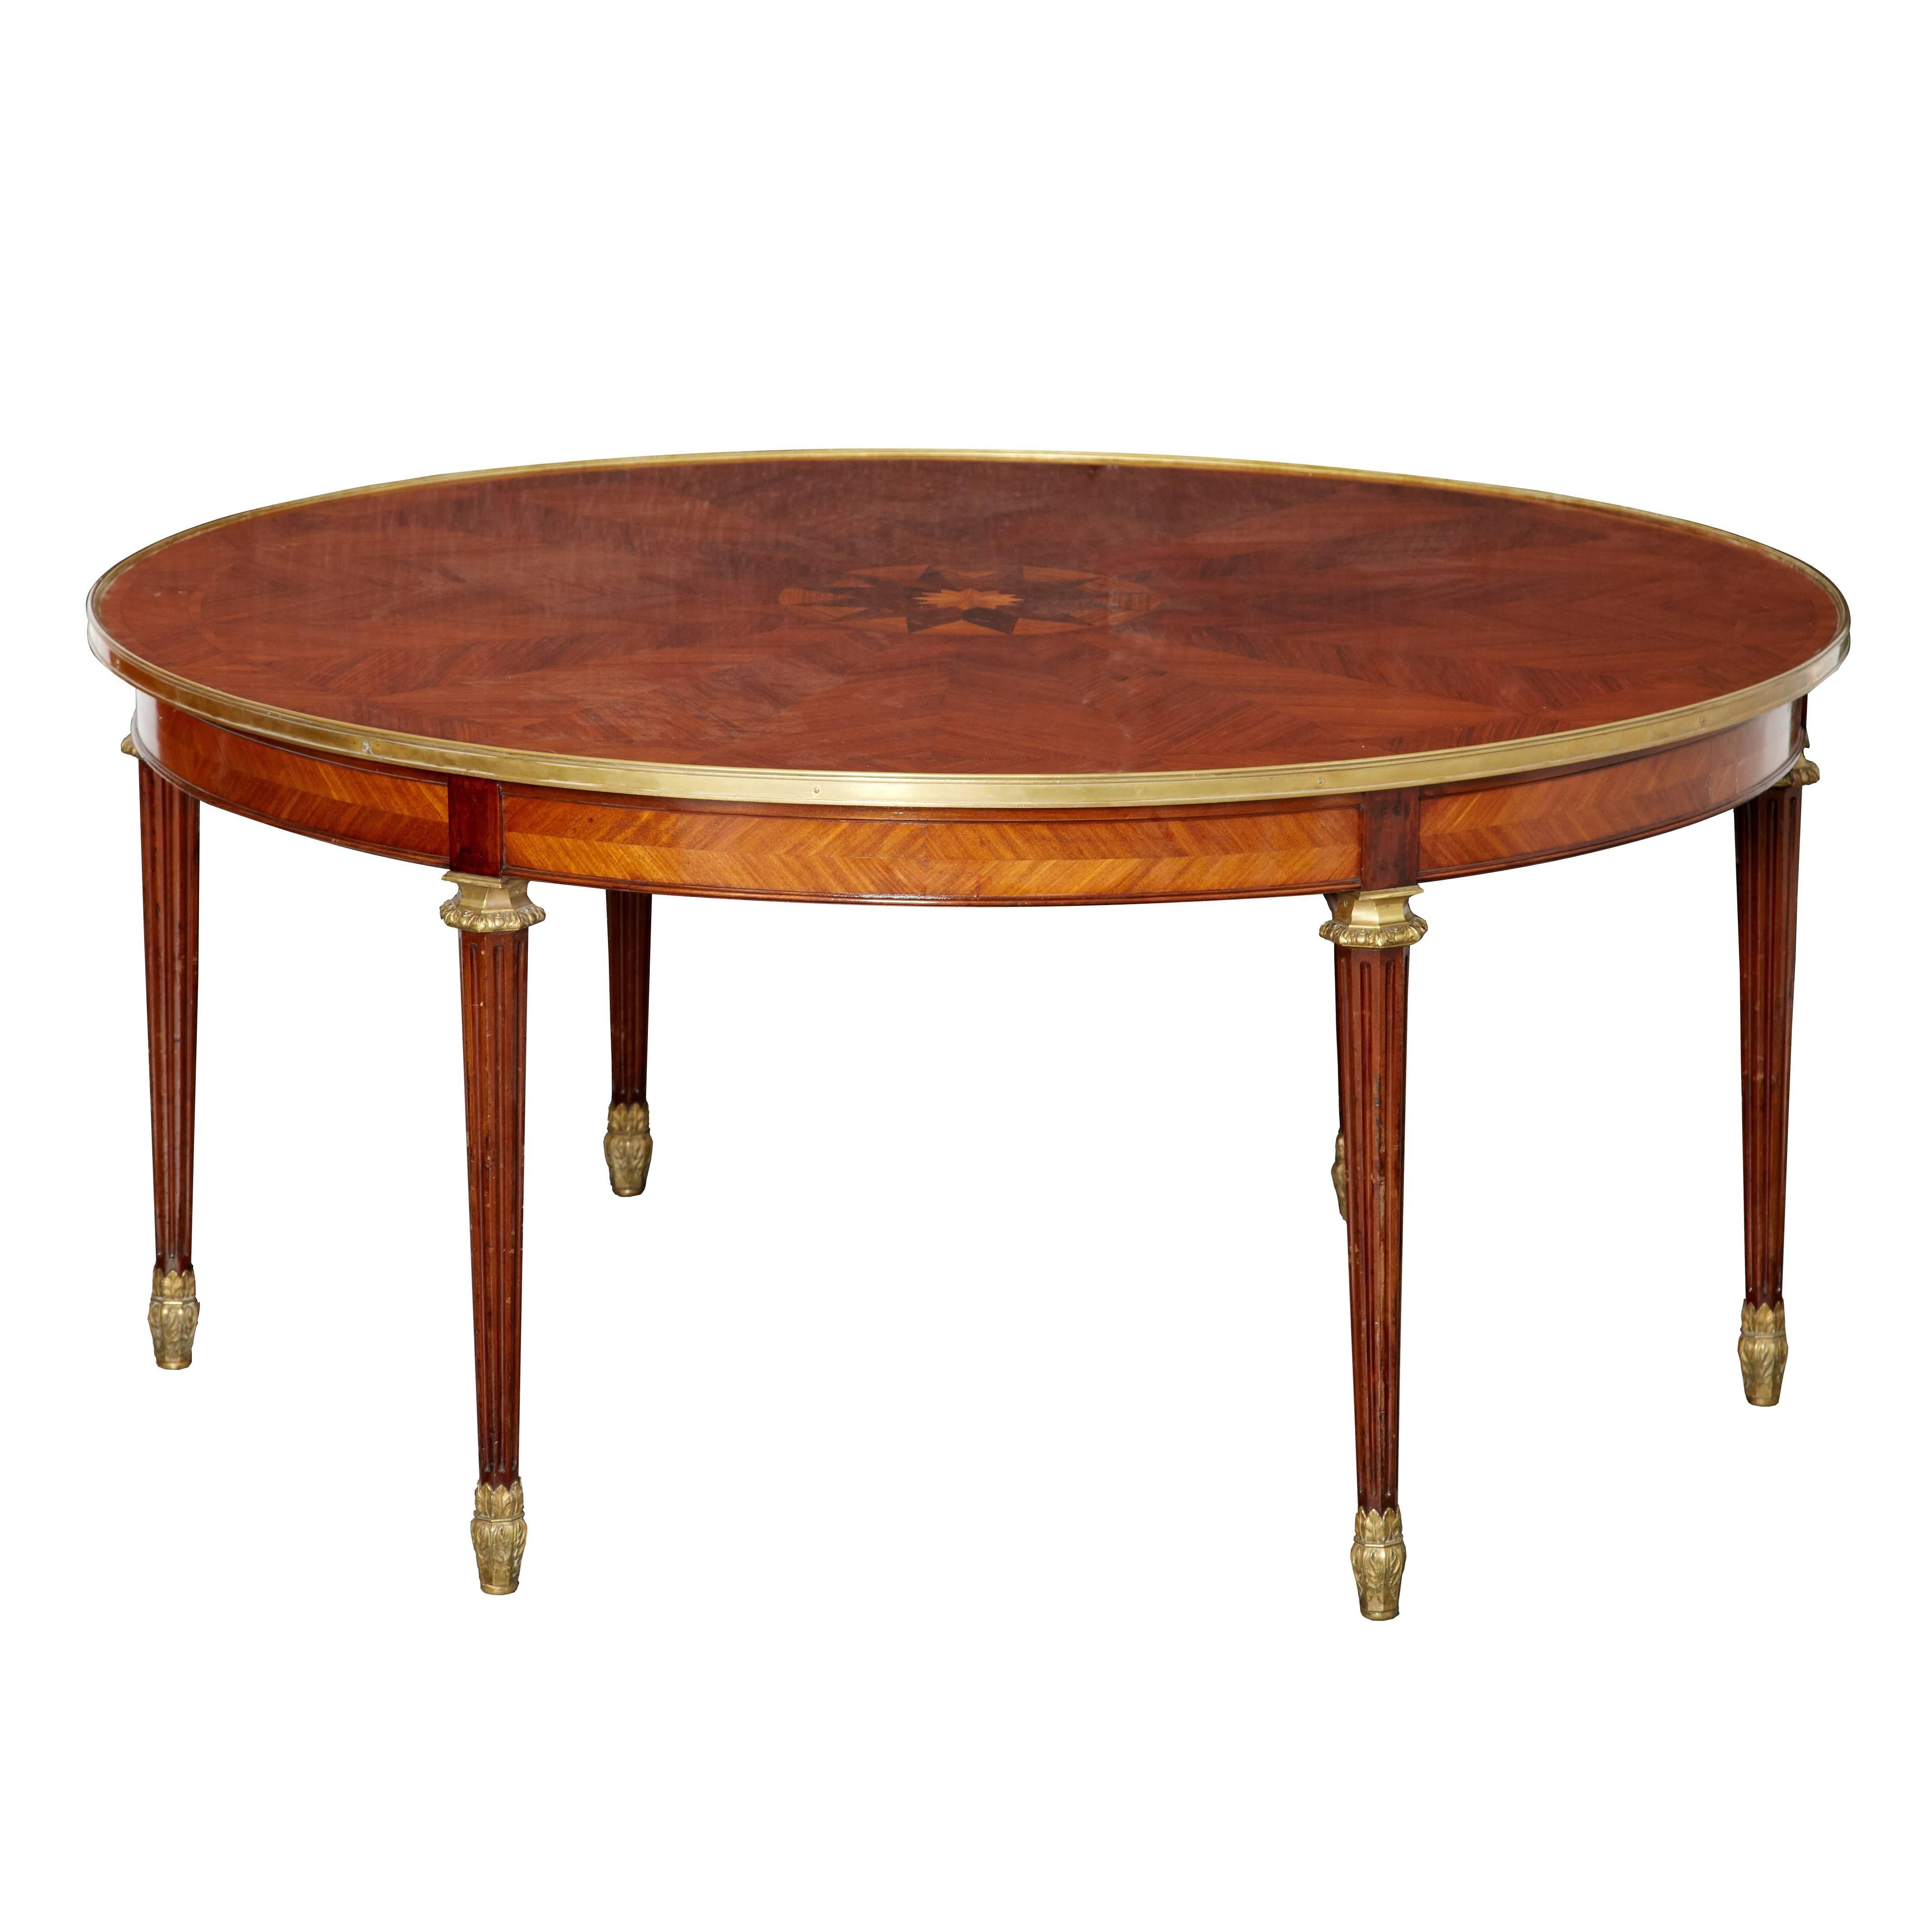 Kingwood and Ormolu Antique French Parquetry Centre Table For Sale